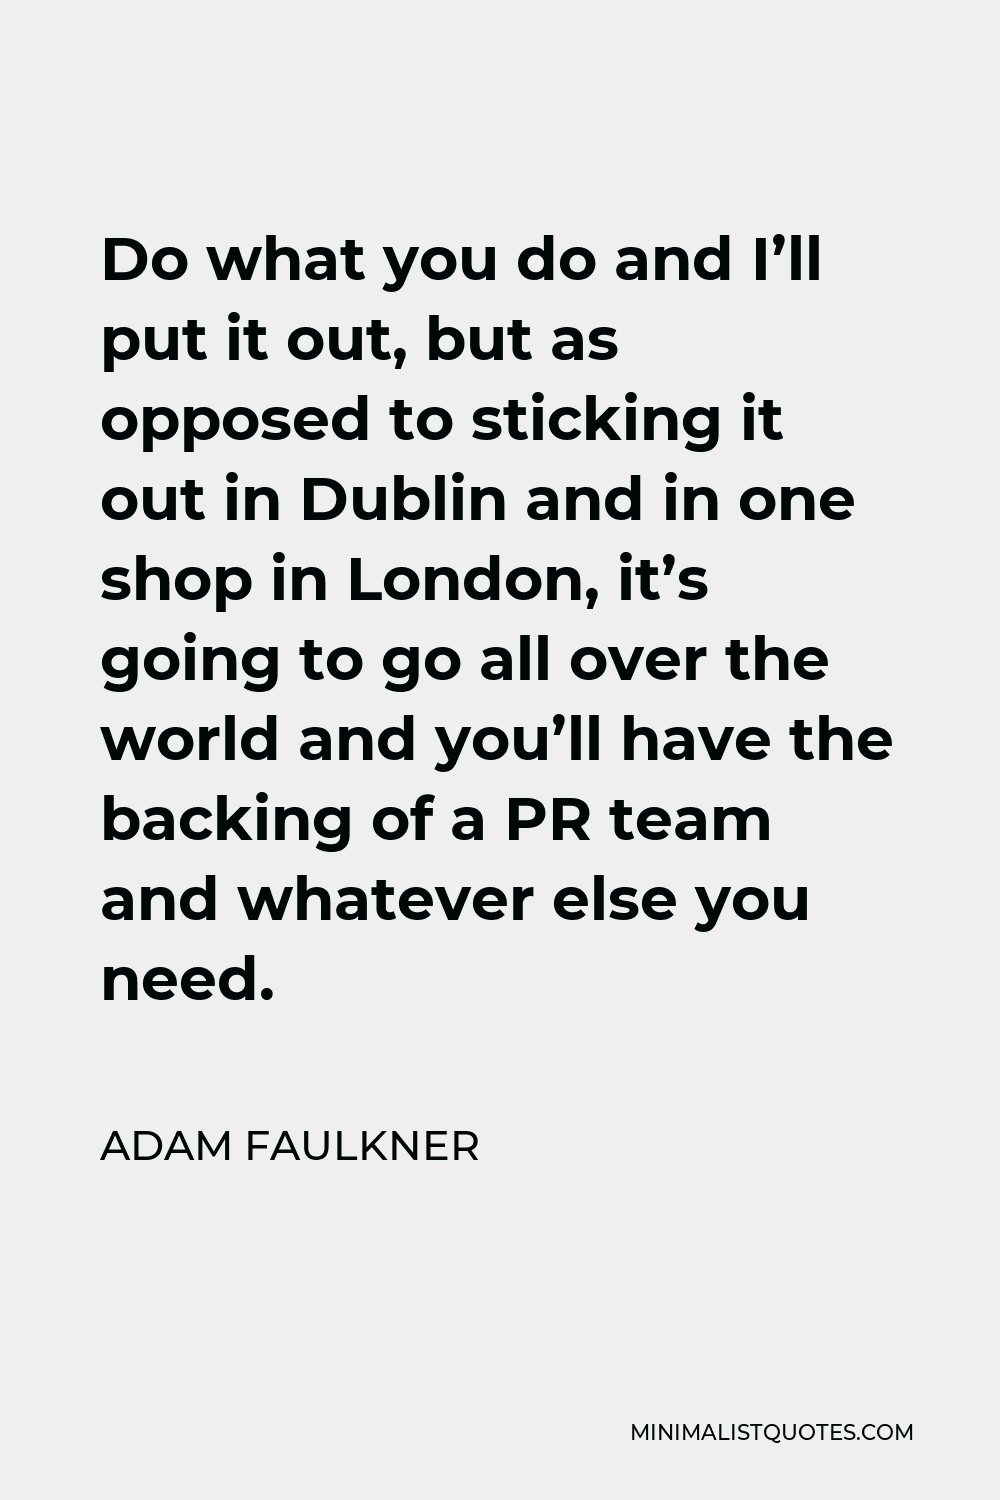 Adam Faulkner Quote - Do what you do and I’ll put it out, but as opposed to sticking it out in Dublin and in one shop in London, it’s going to go all over the world and you’ll have the backing of a PR team and whatever else you need.